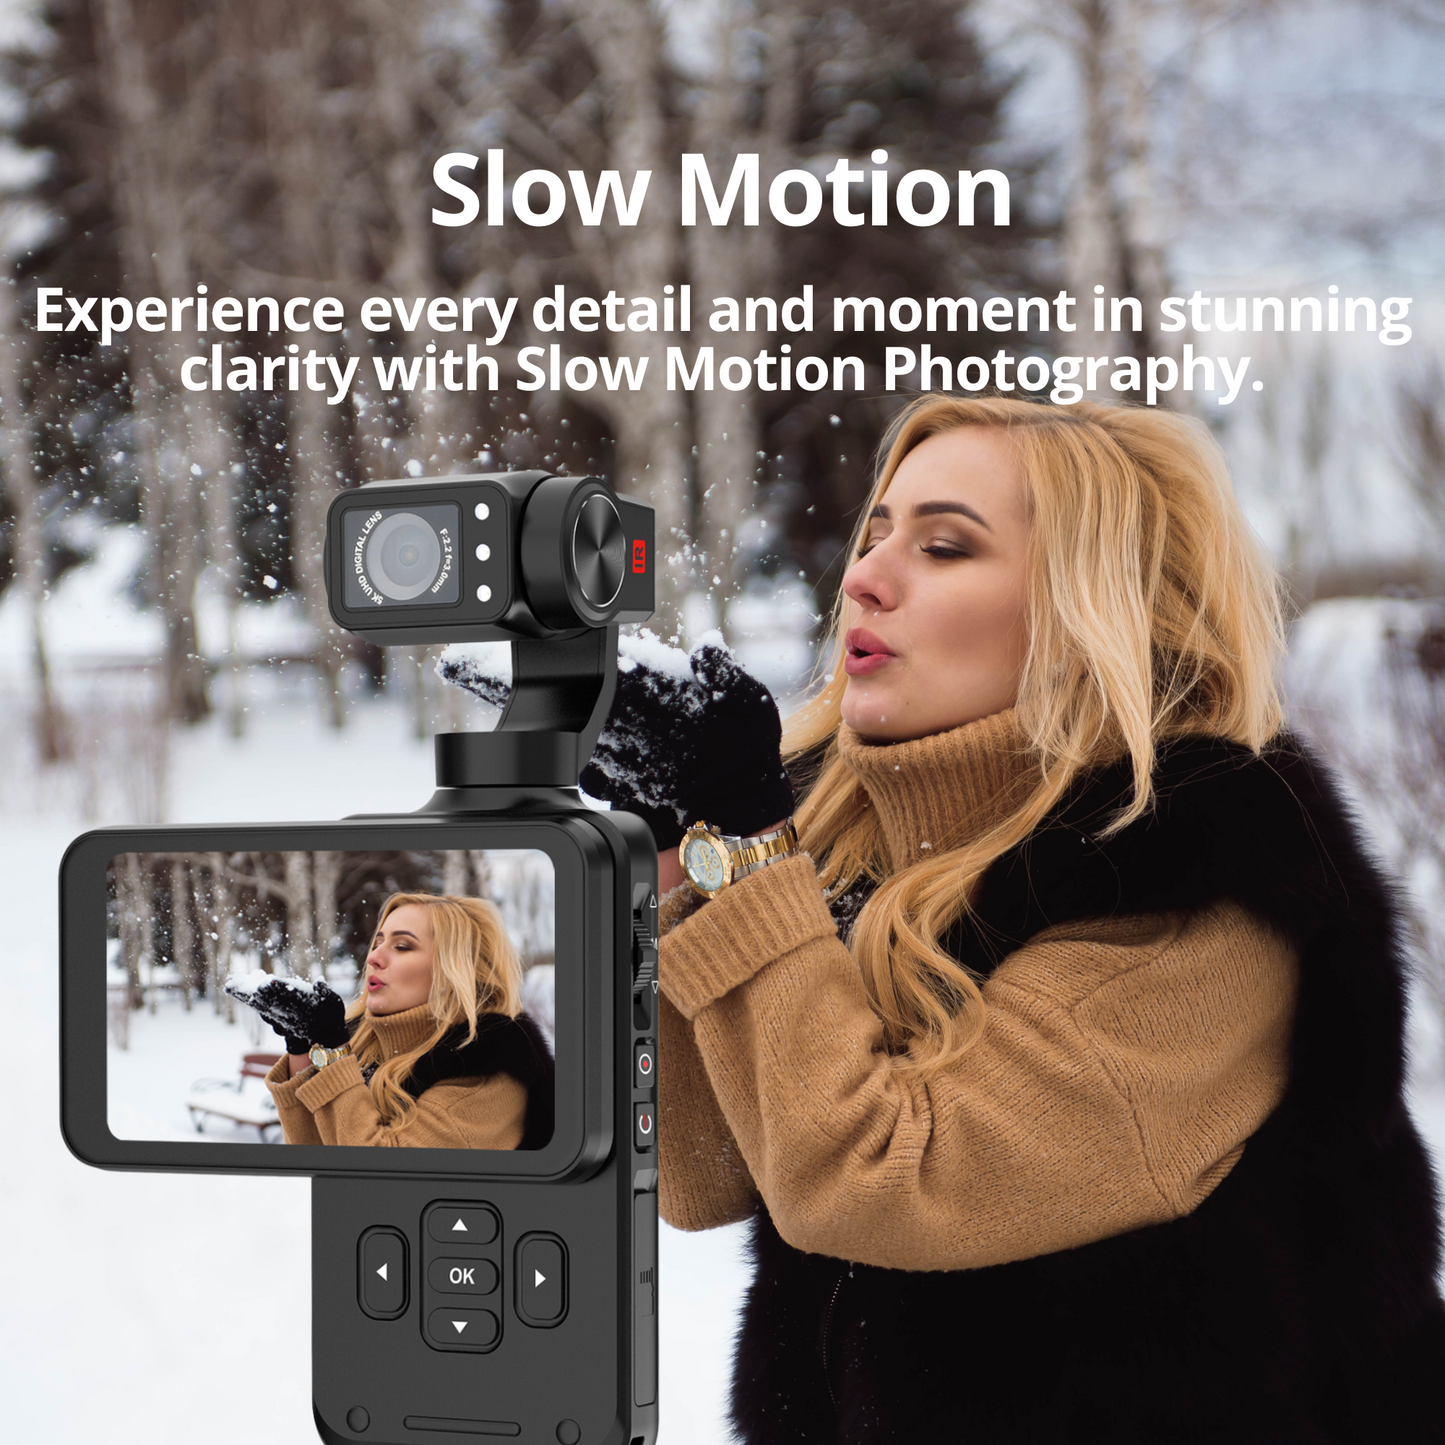 The Bigly Brothers Nimble 1 World largest Pocket Camera Screen 3.5-inch vlogging Camera screen, 3-axis EIS Stabilization, 5k @30fps, 4k @60fps , AI Face tracking, IR night Vision, 120° wide-angle, 180° rotatable screen great for youtube